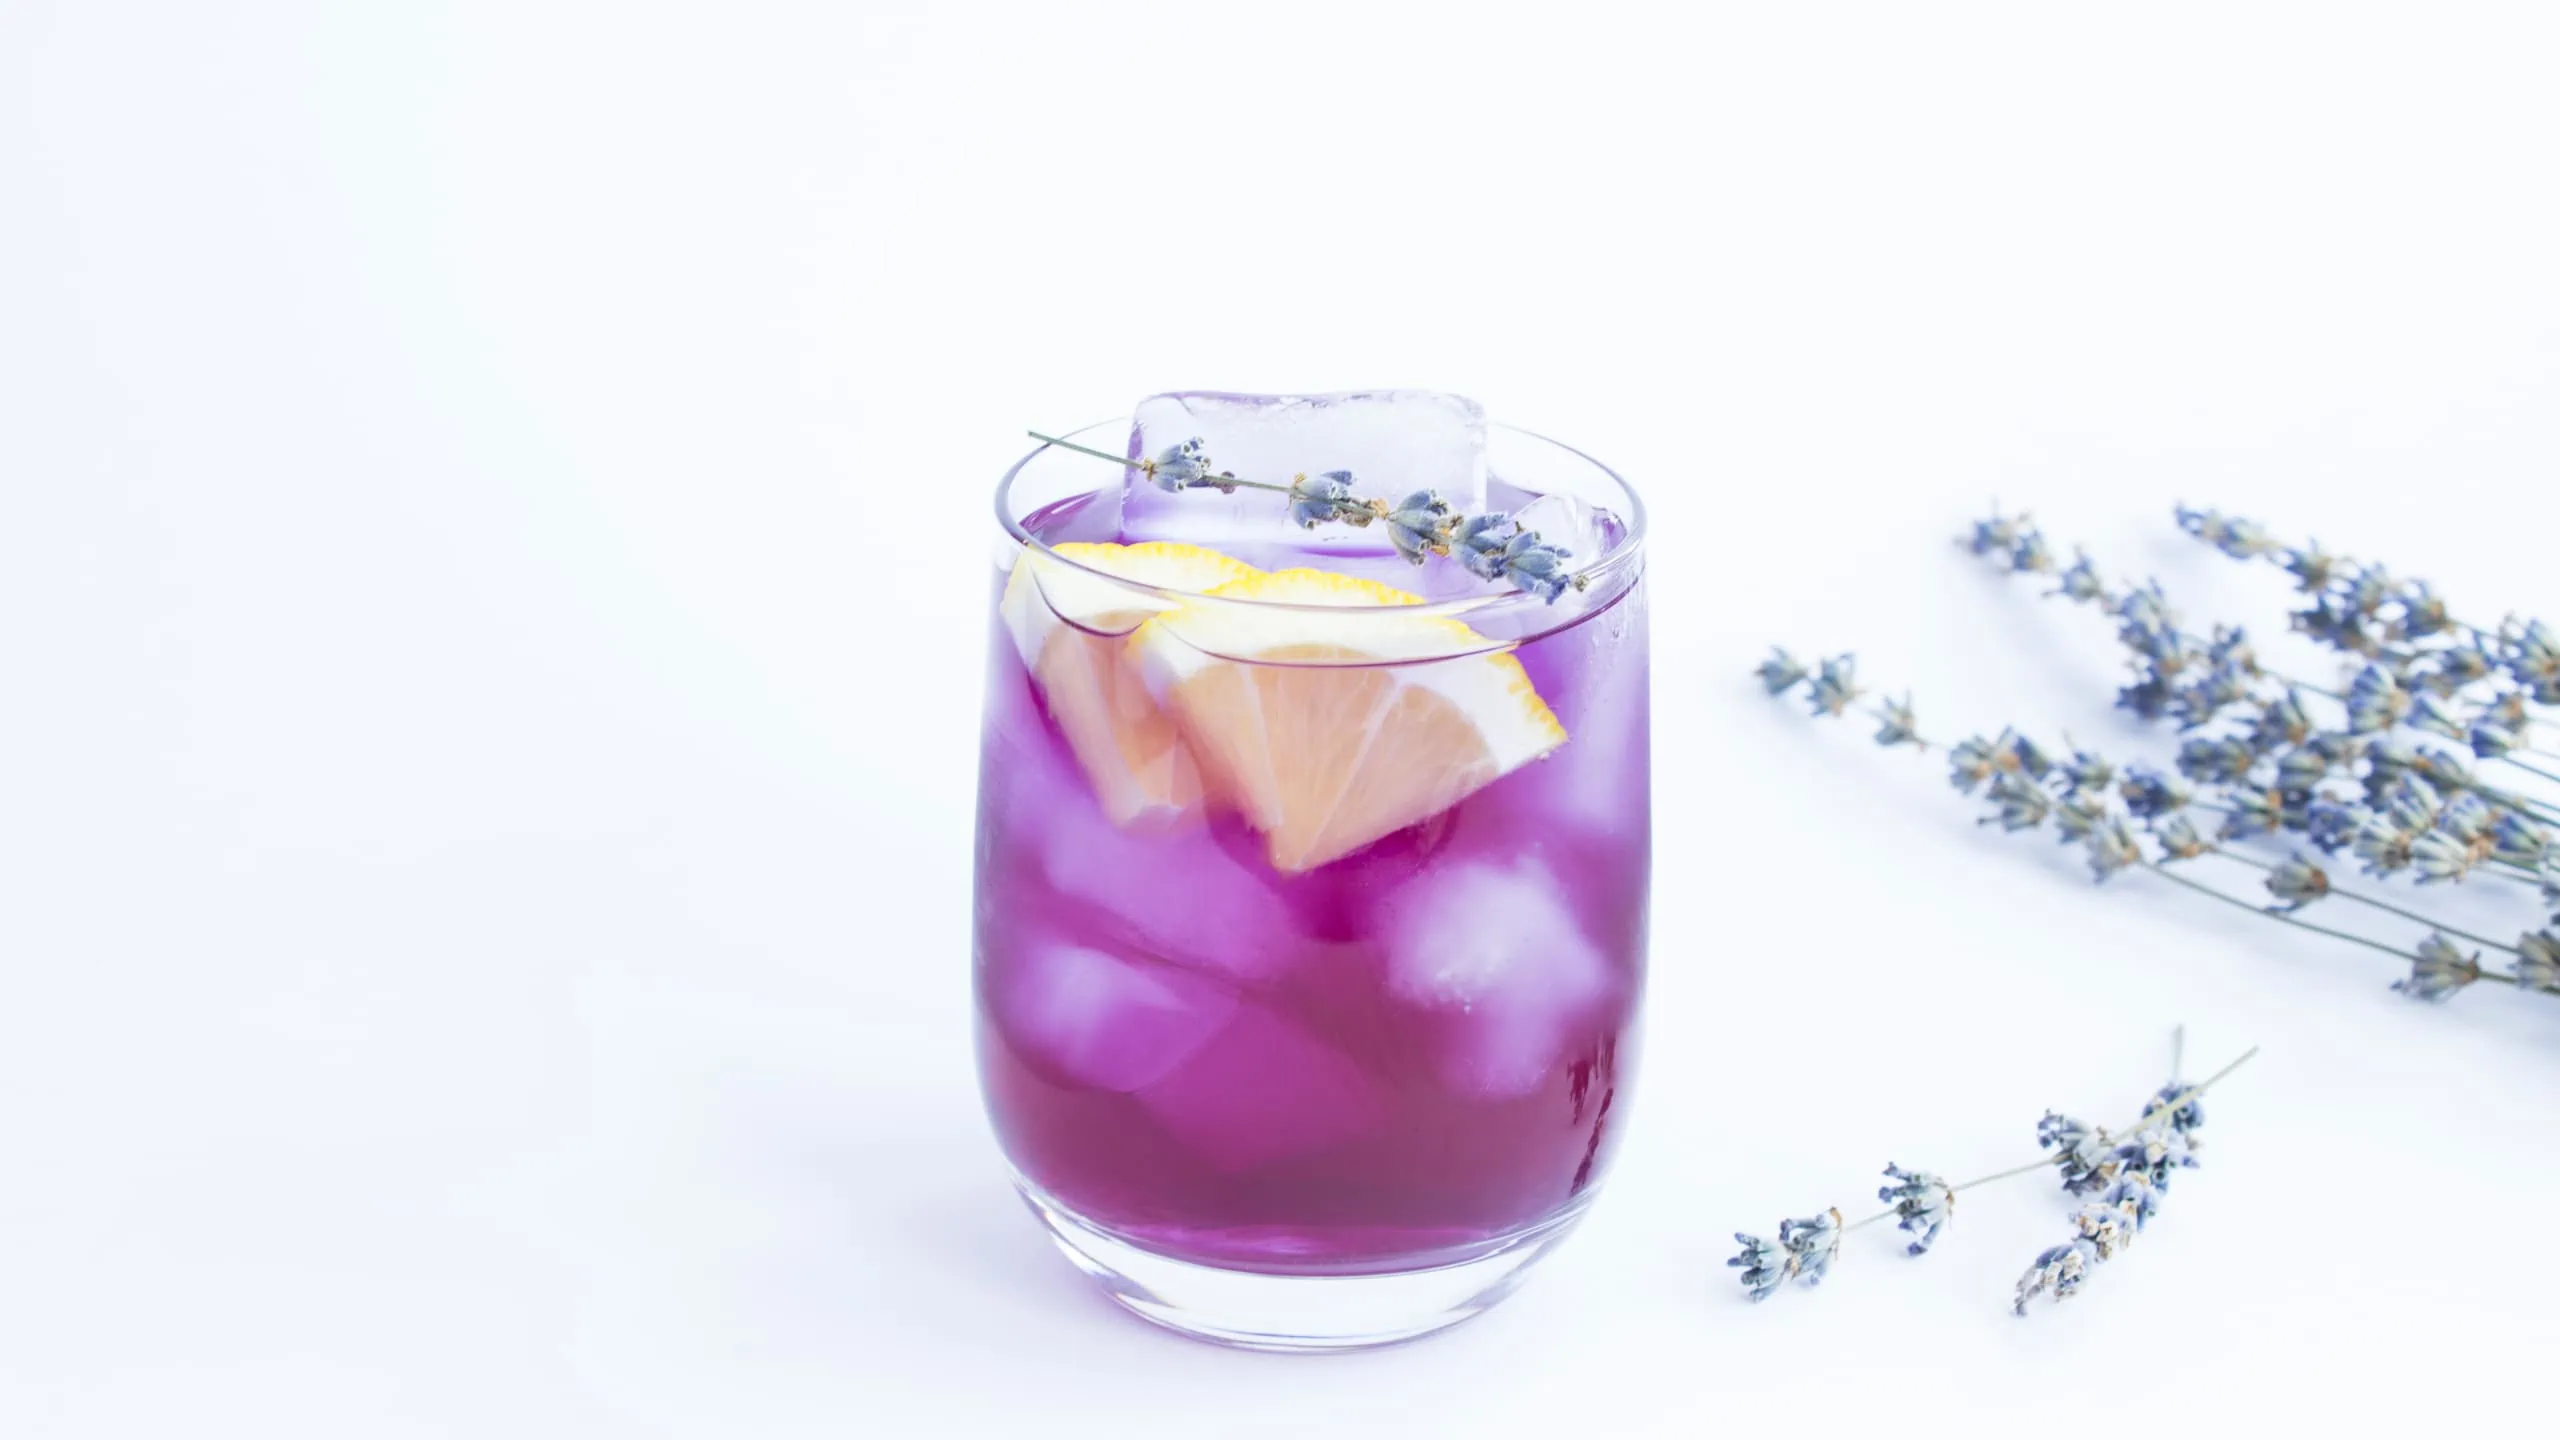 Non-alcoholic and flavorful violet sake with lemon